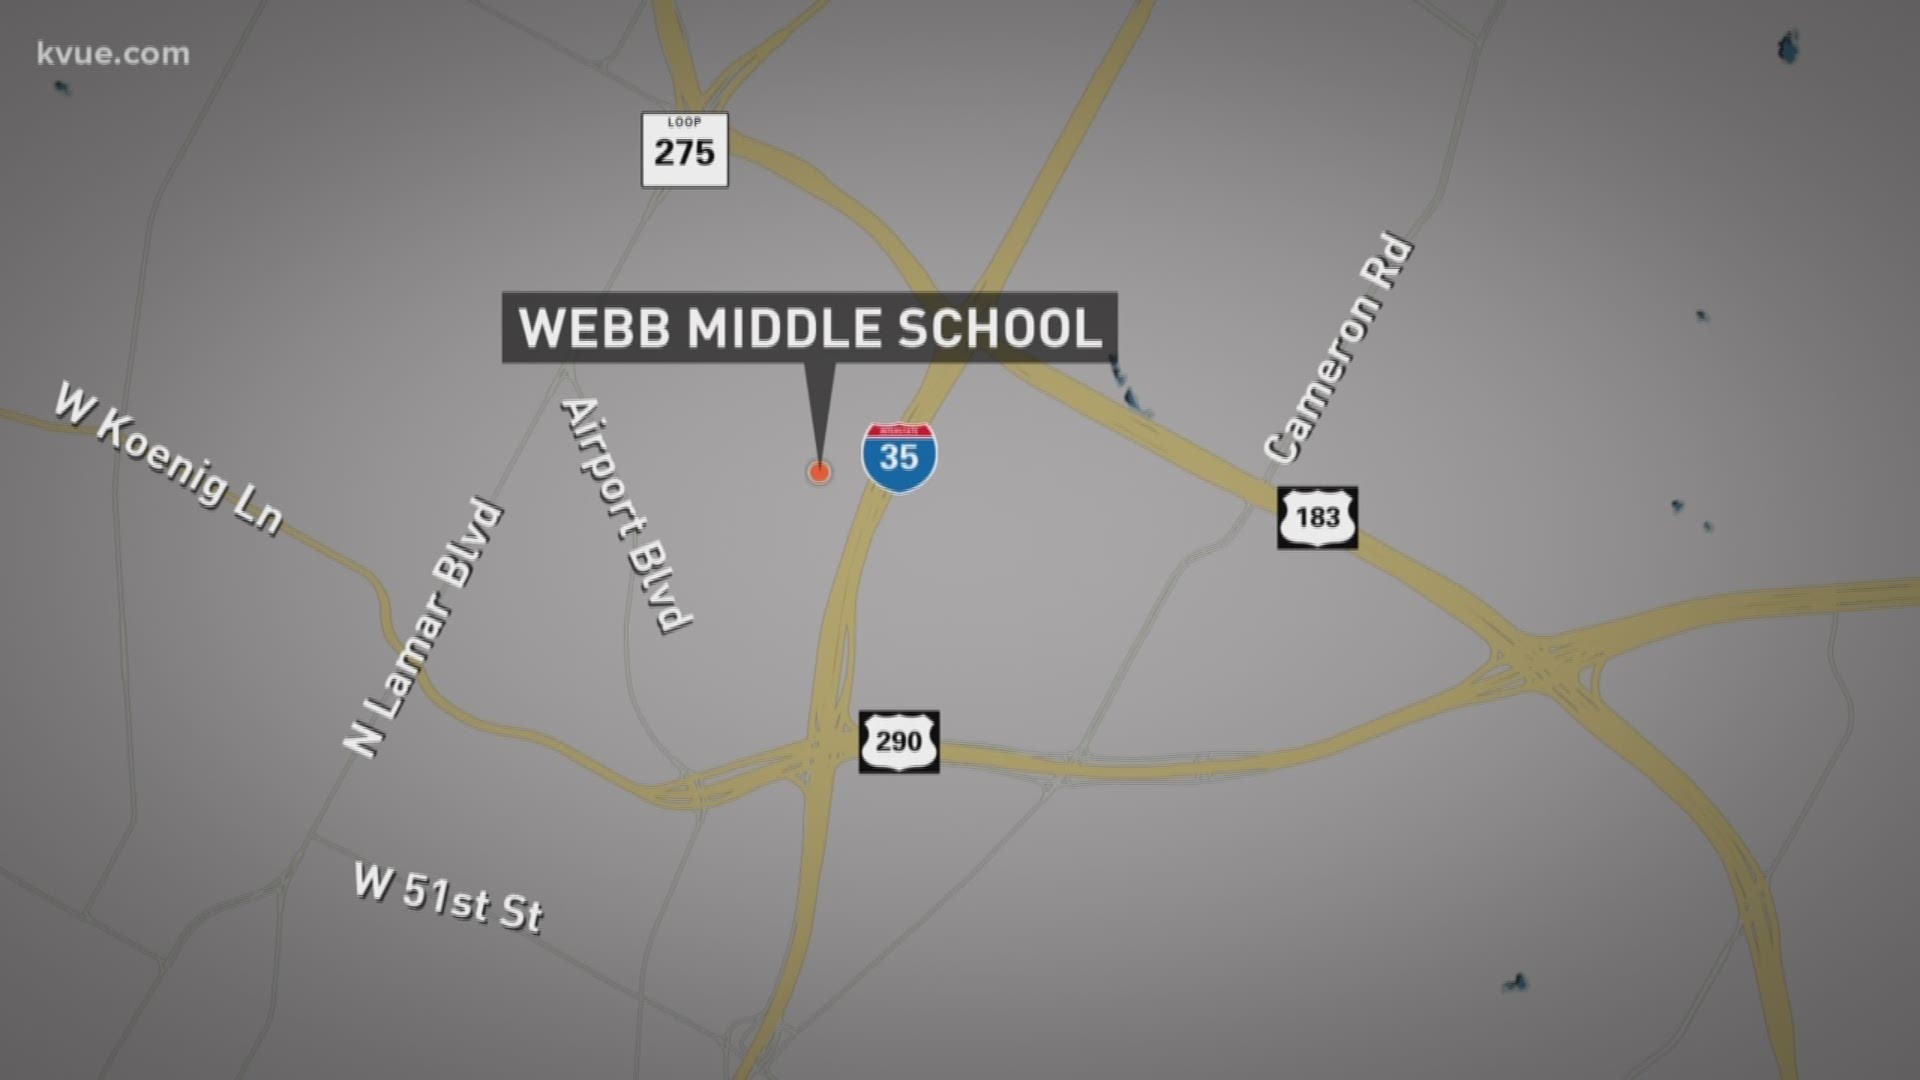 Police said a local father went into a middle school to beat up two young students.